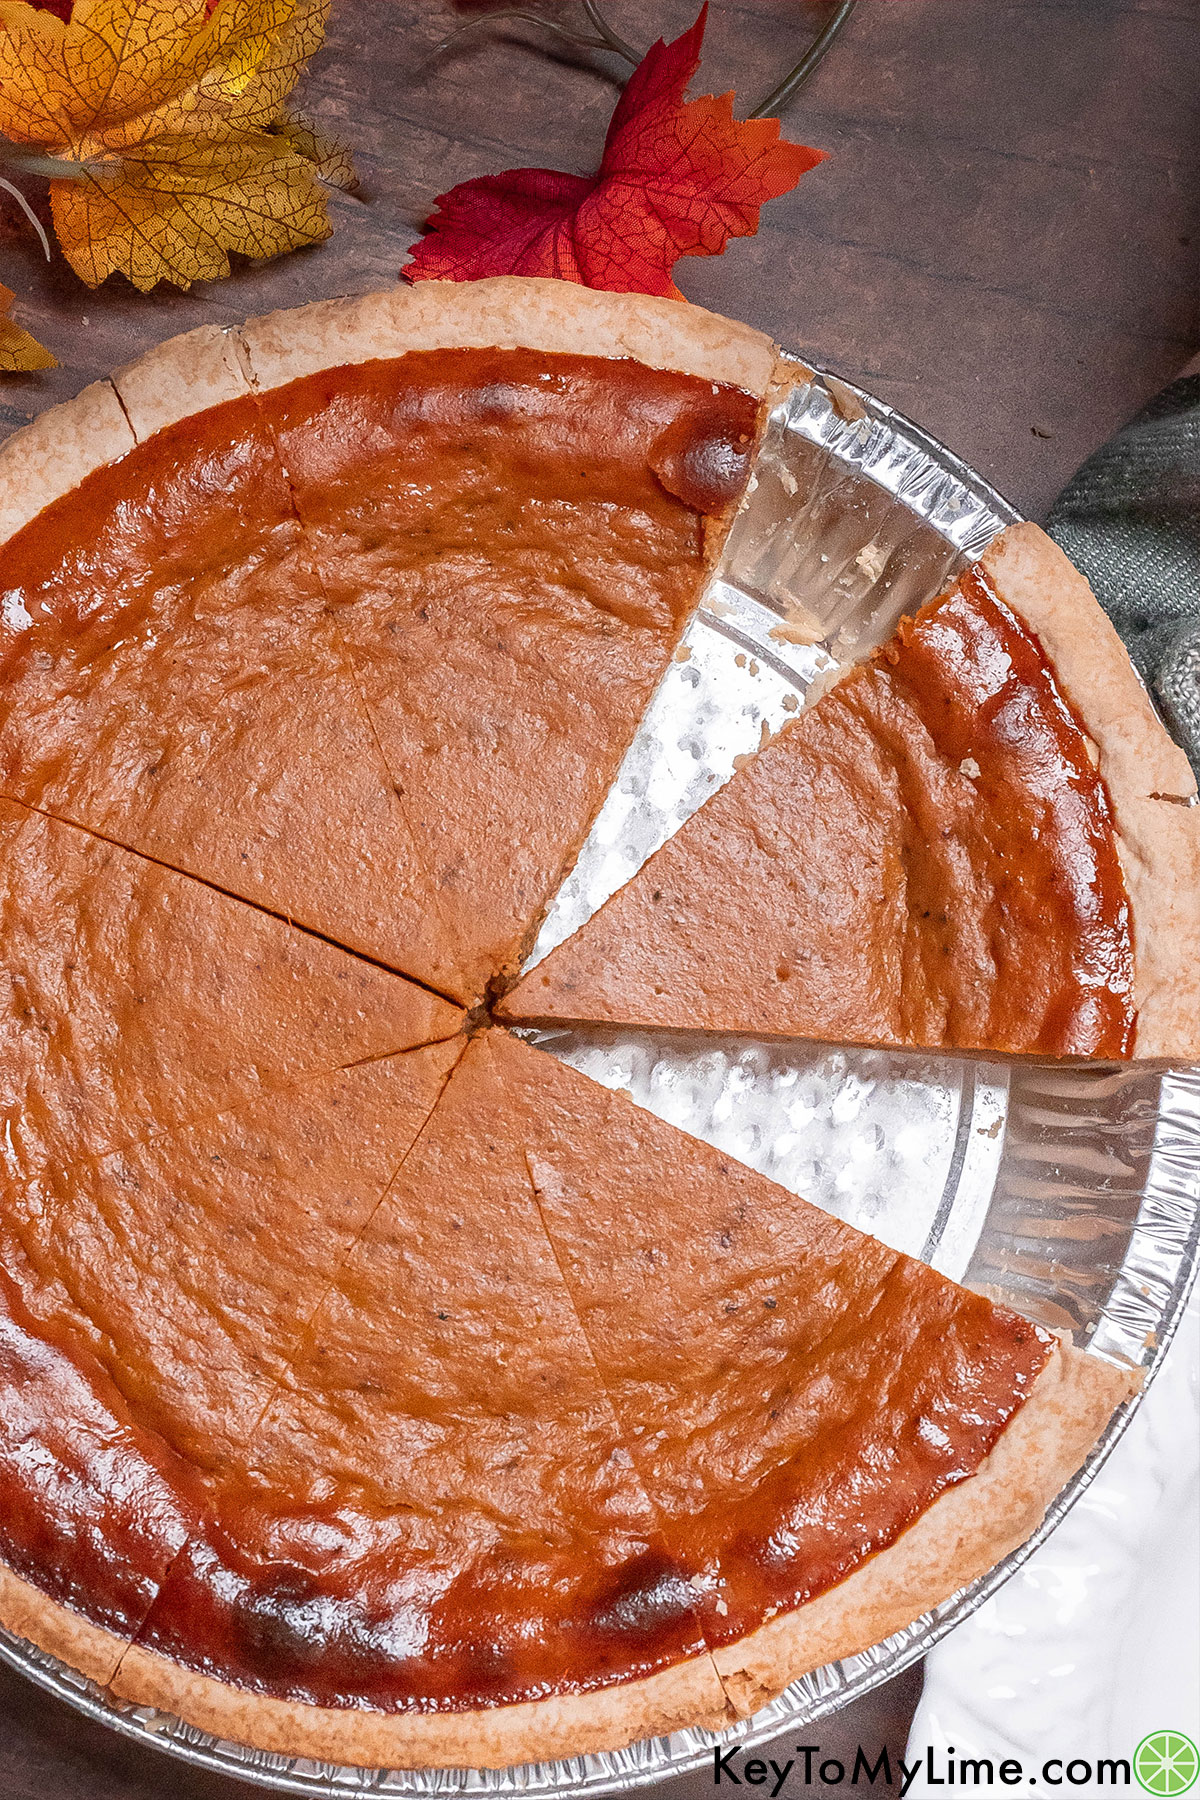 An overhead image of a pumpkin pie with slices missing and fall leaves around.